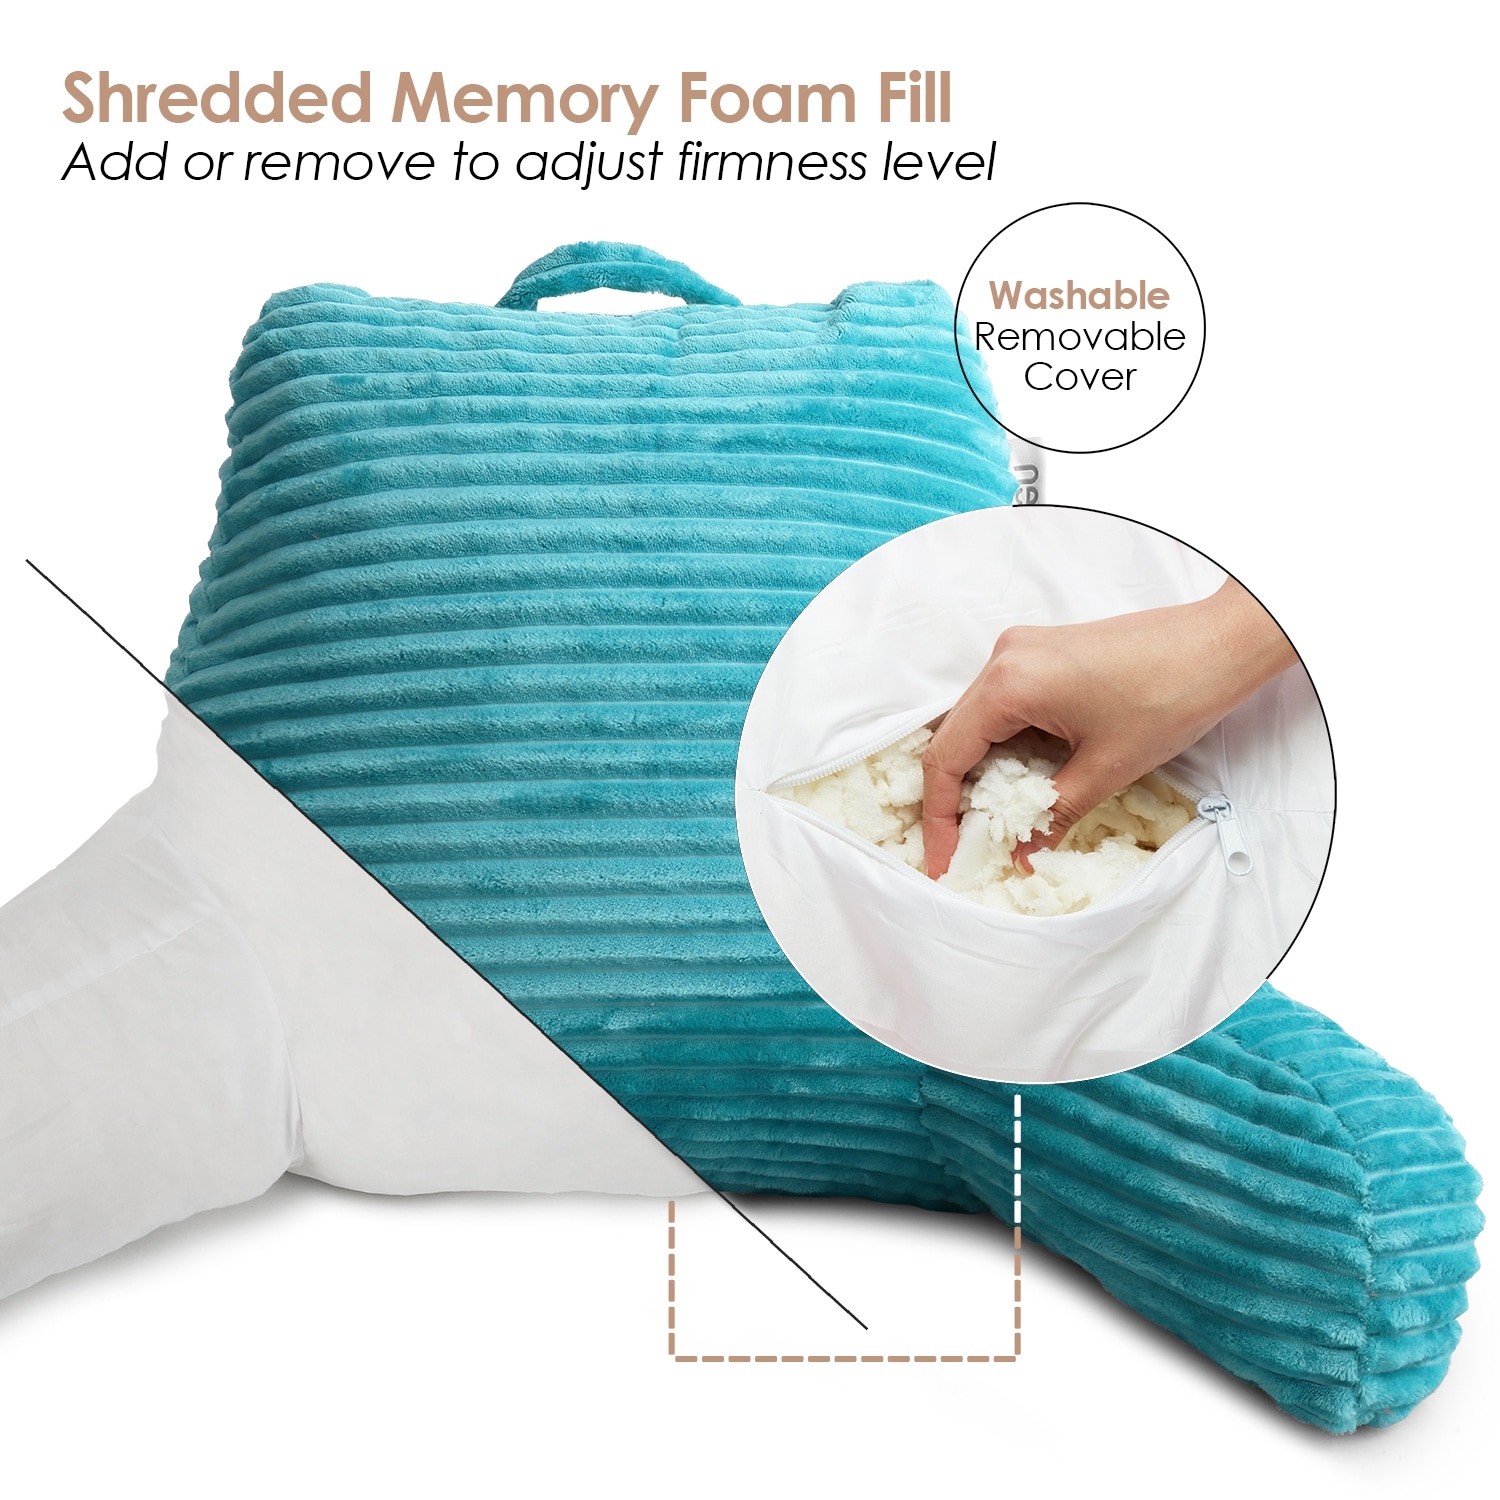 Nestl Cut Plush Striped Reading Pillow - Back Support Shredded Memory Foam Bed Rest Pillow with Arms - Medium - Teal